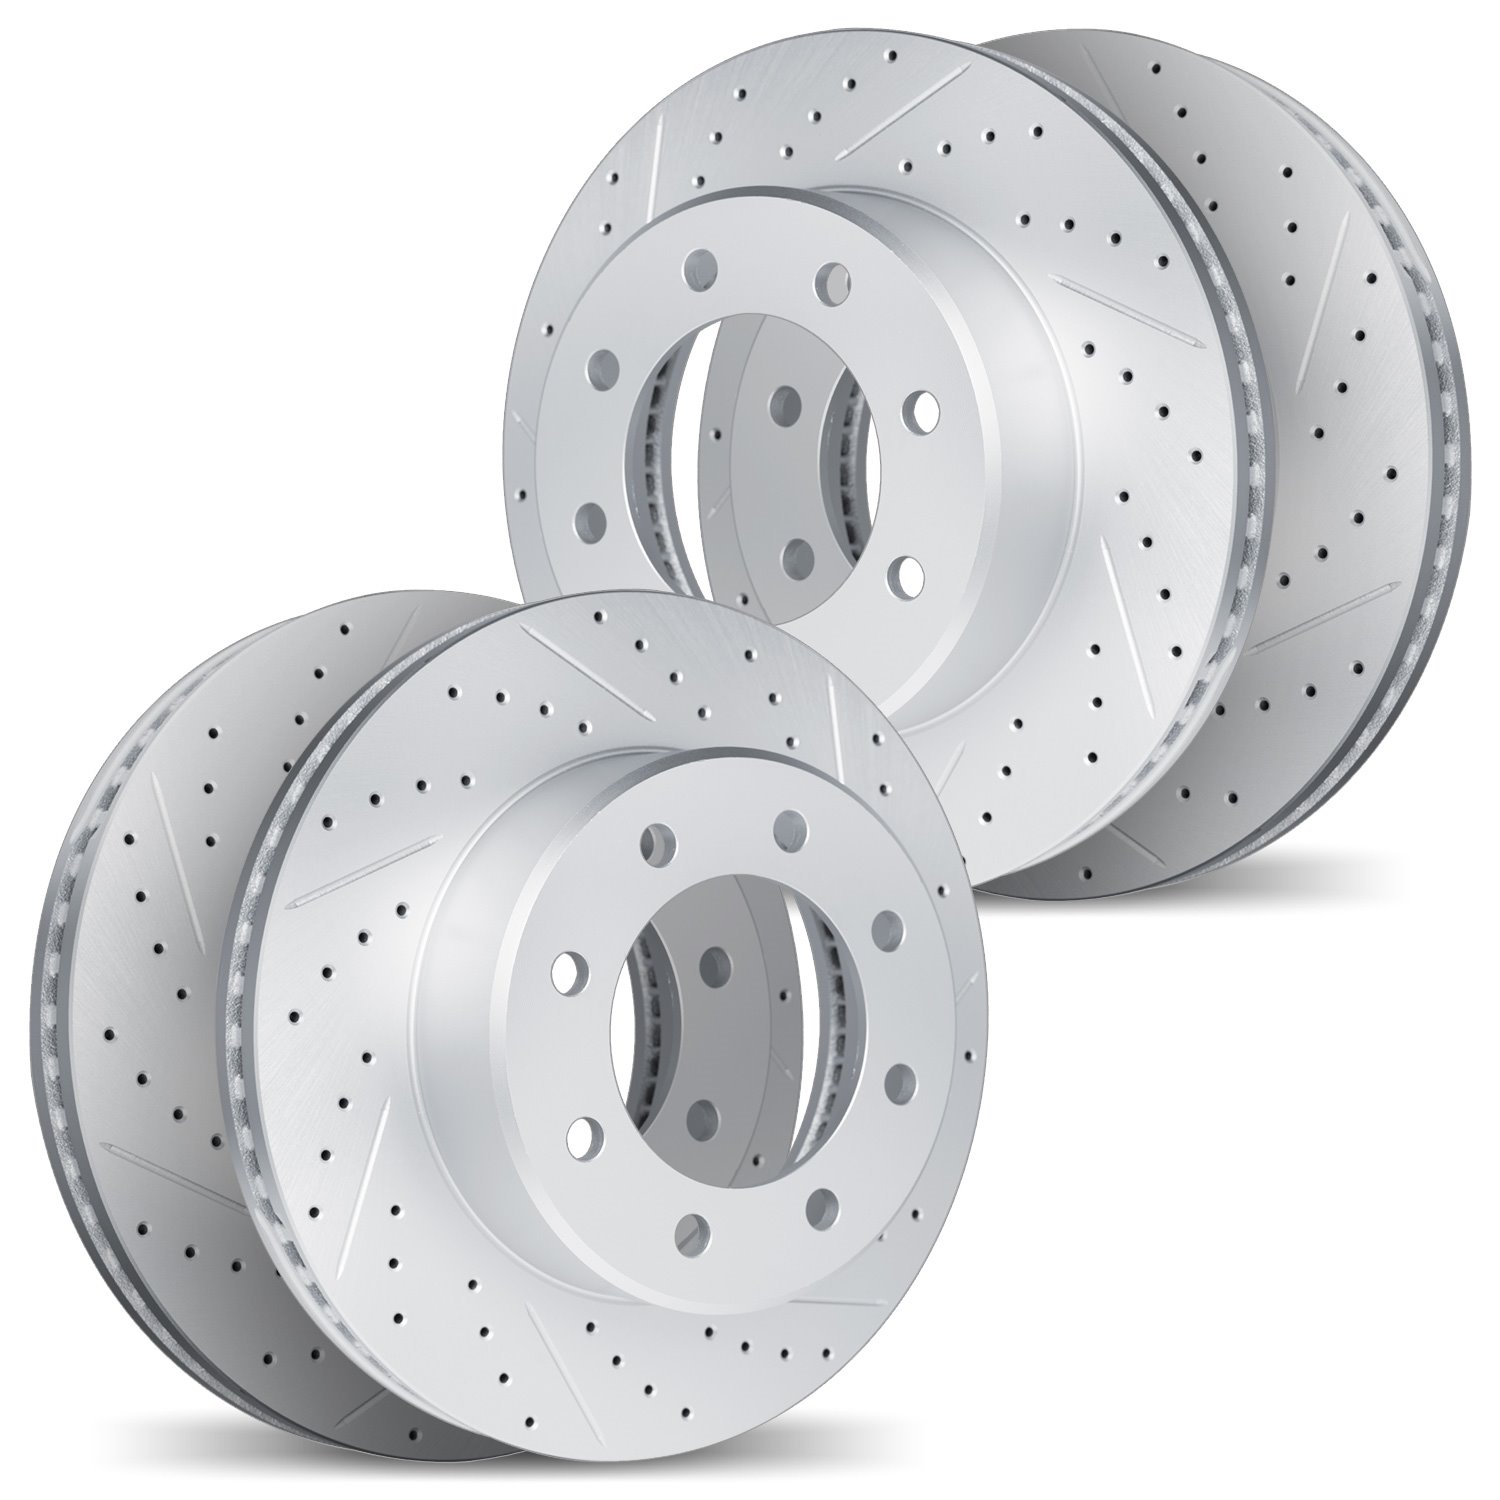 2004-54112 Geoperformance Drilled/Slotted Brake Rotors, Fits Select Ford/Lincoln/Mercury/Mazda, Position: Front and Rear